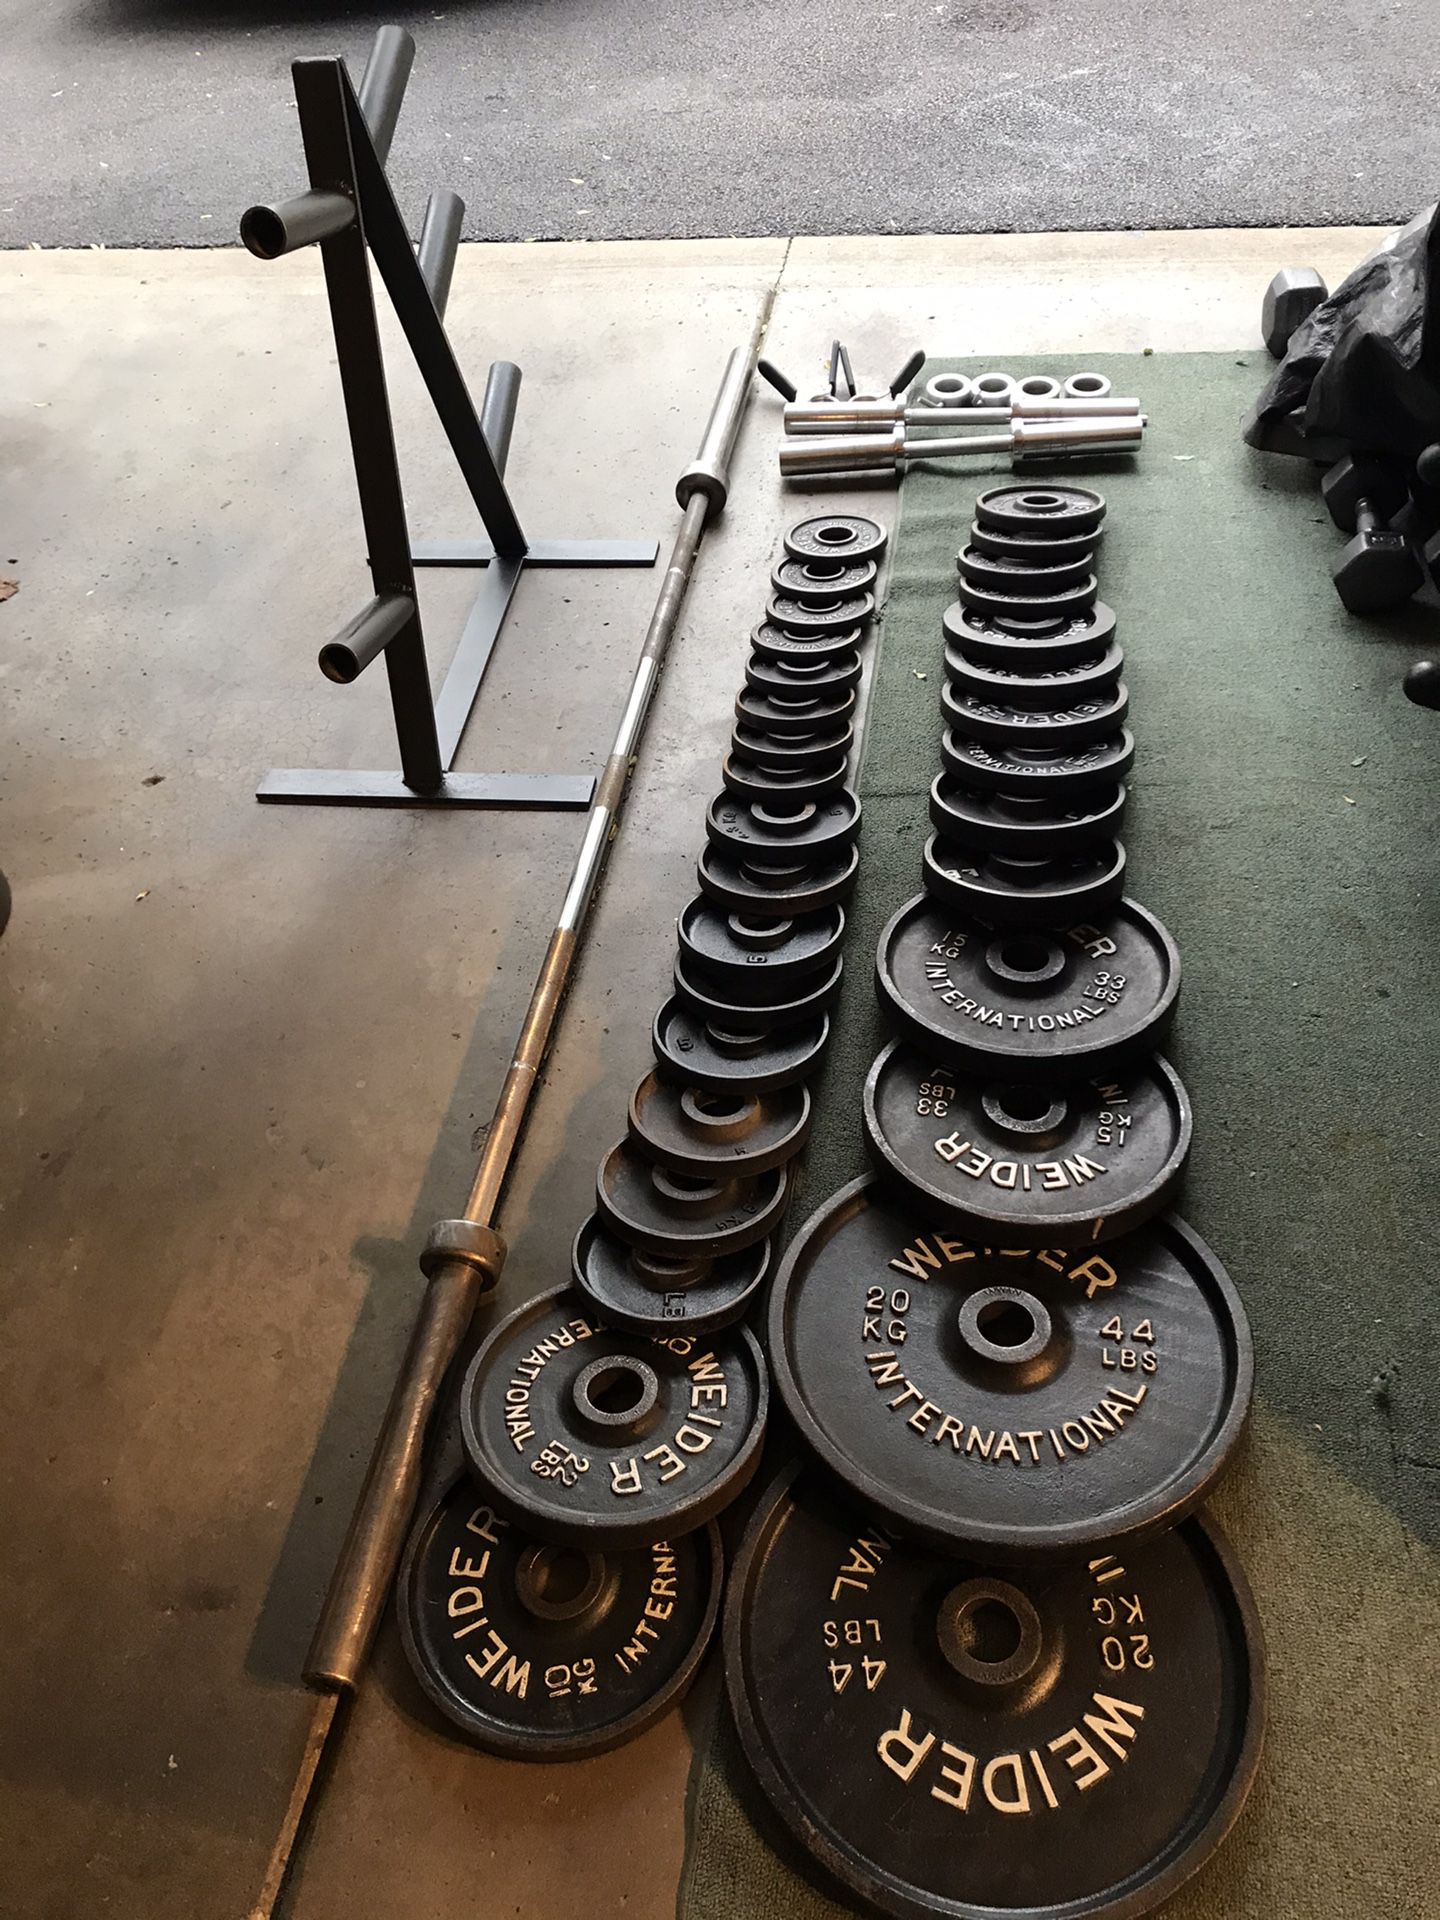 385lb Olympic weight set, 7ft 45lb Olympic bar, 2 Olympic dumbbells,& olympic plate tree $275